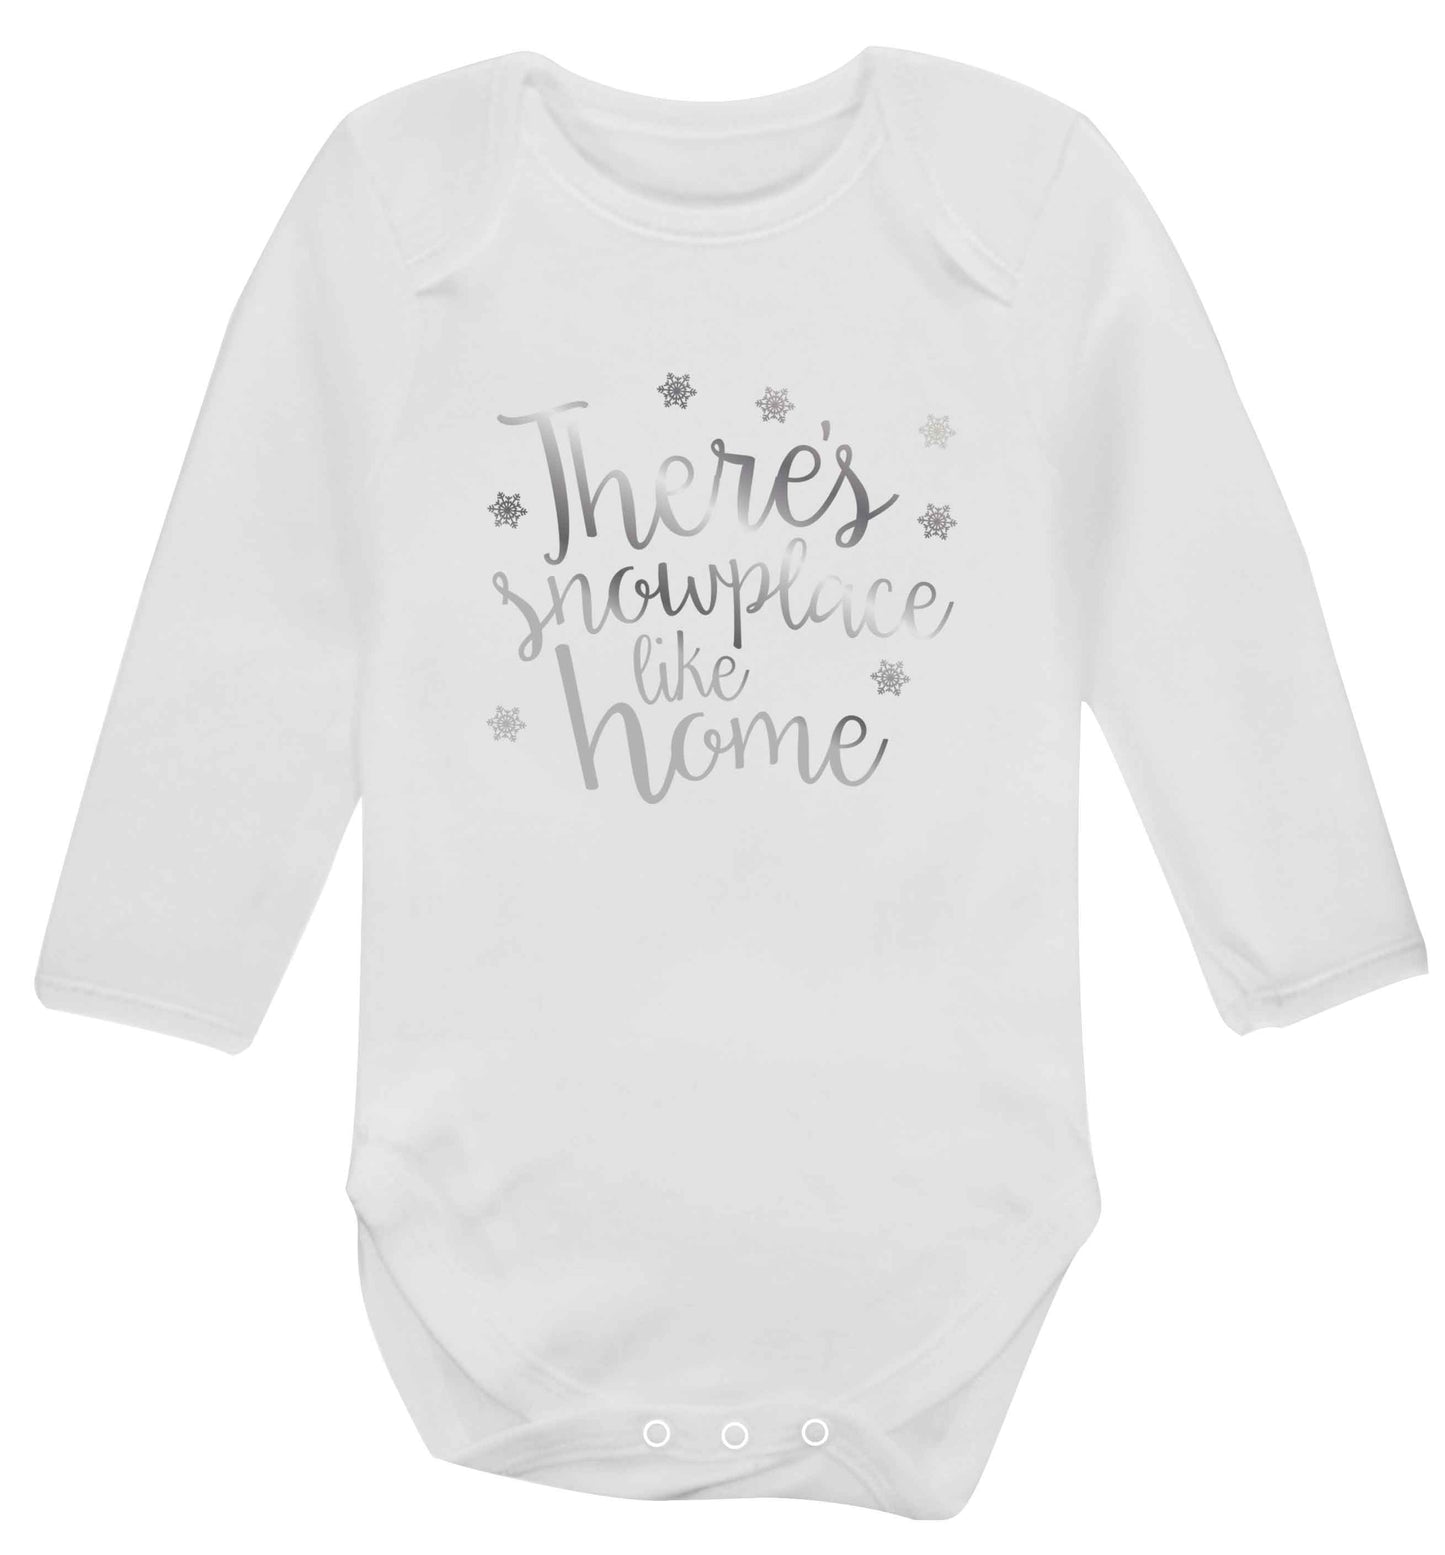 There's snowplace like home - metallic silver baby vest long sleeved white 6-12 months